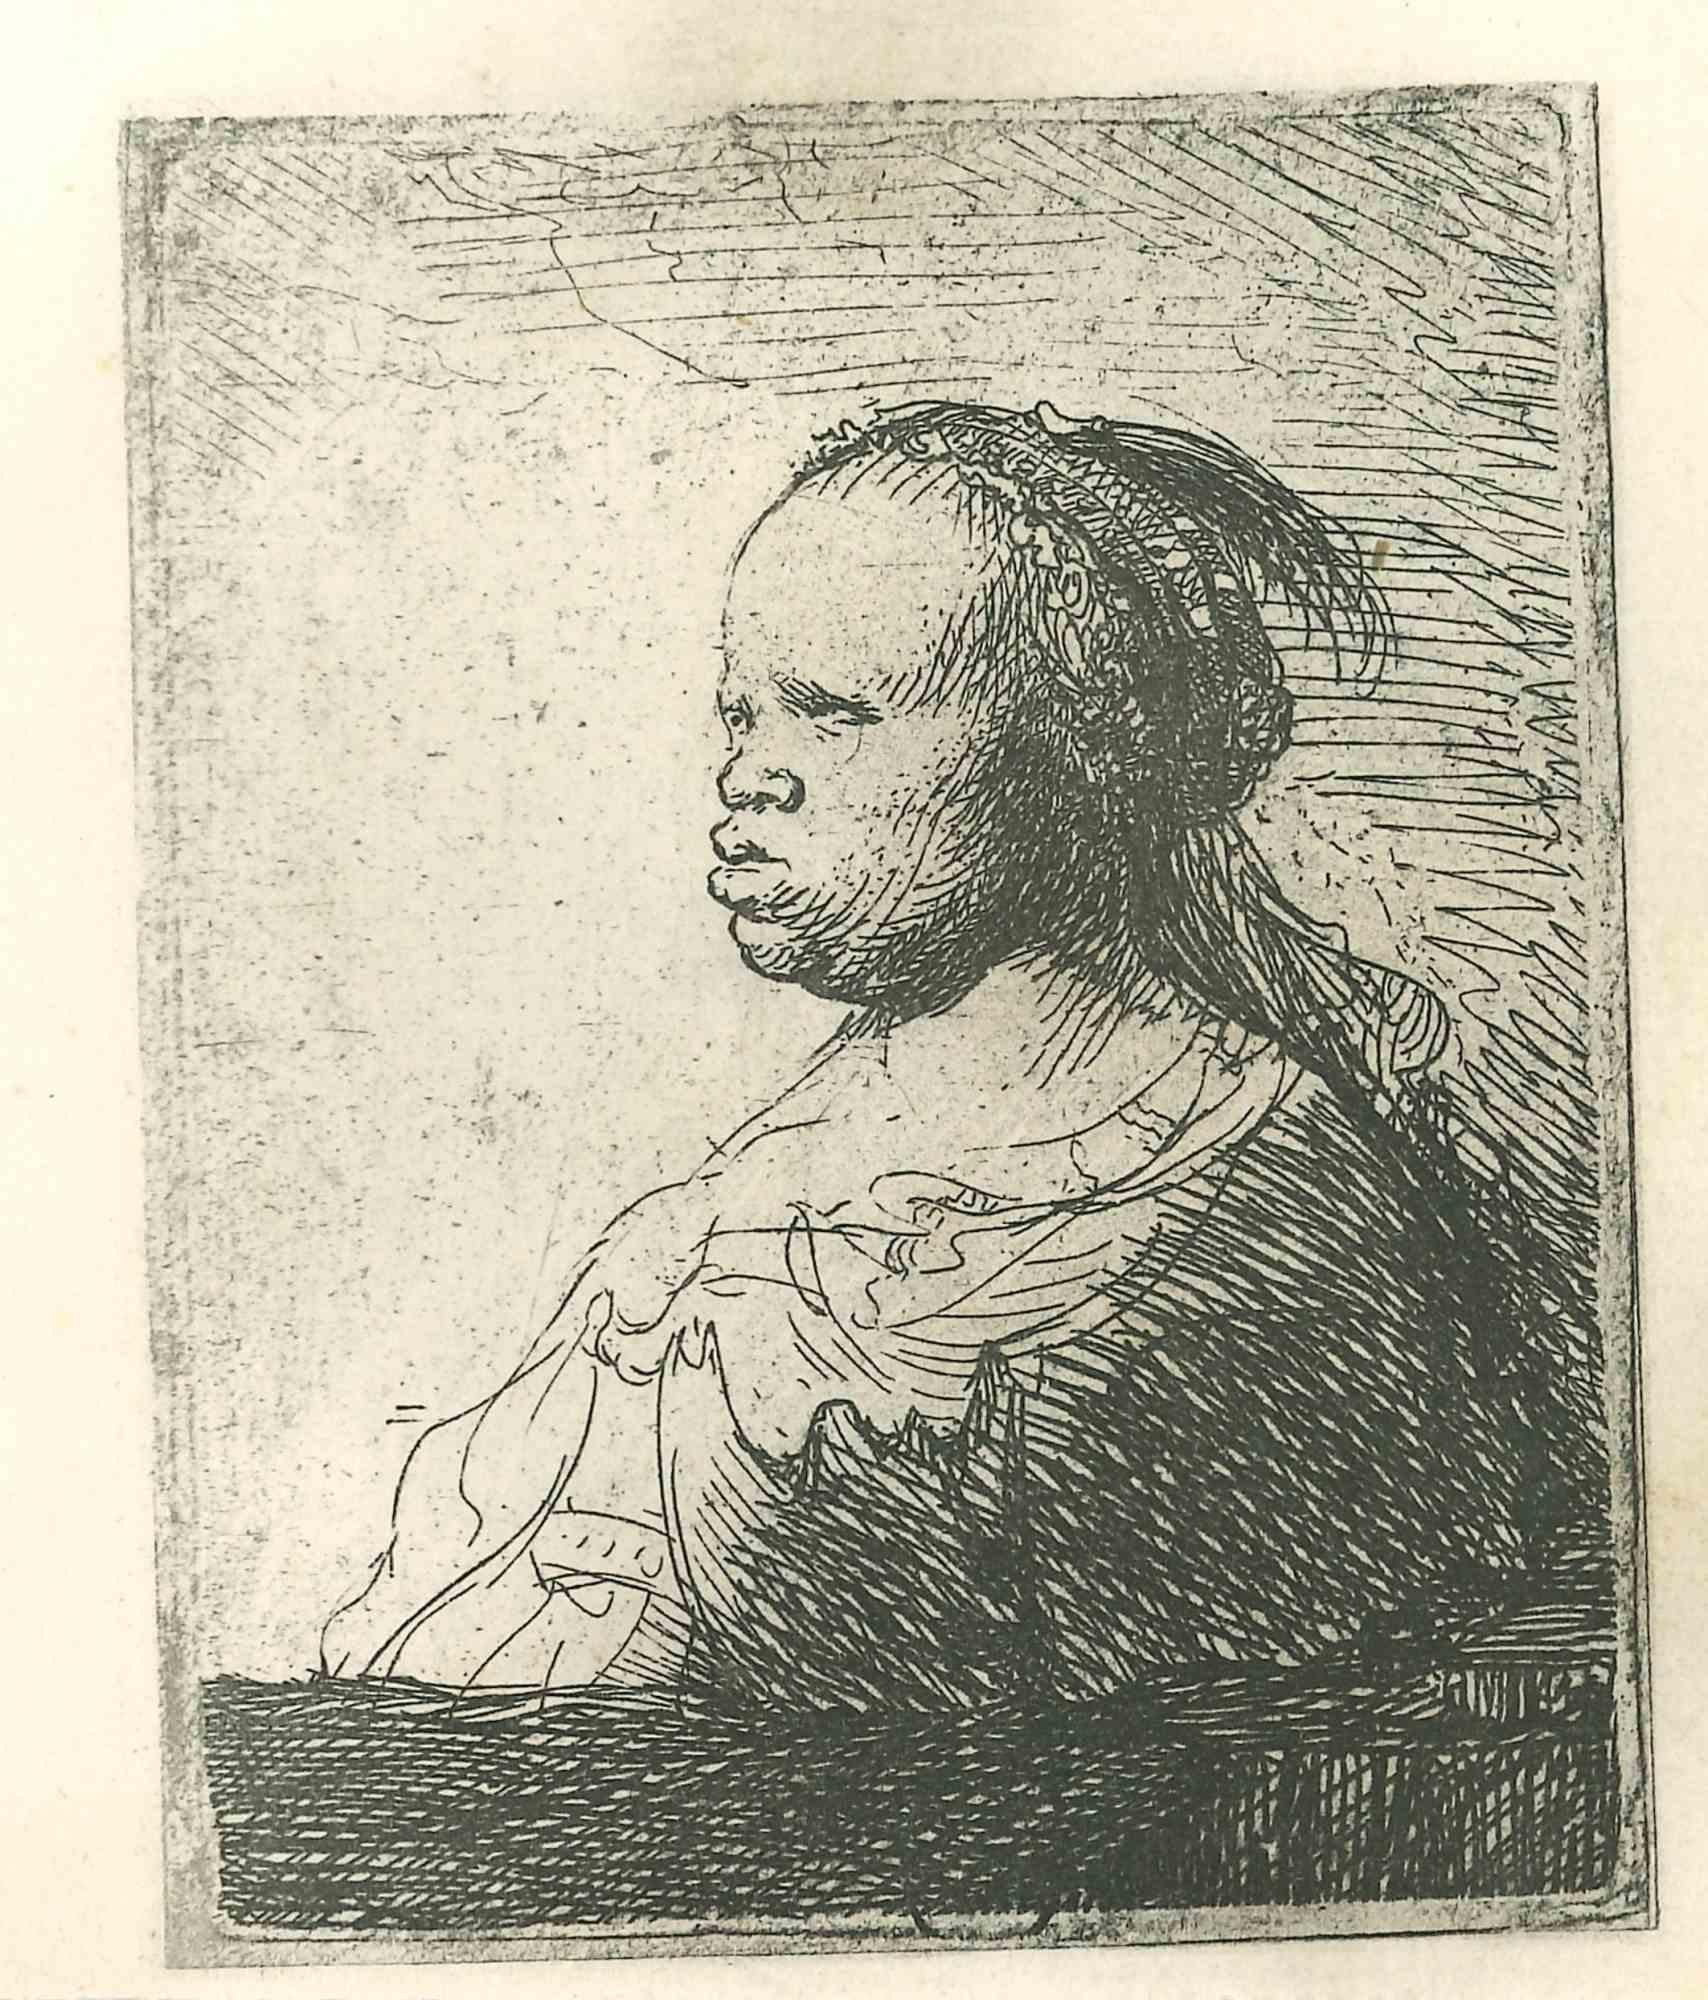 Why are Rembrandt's etchings so important?